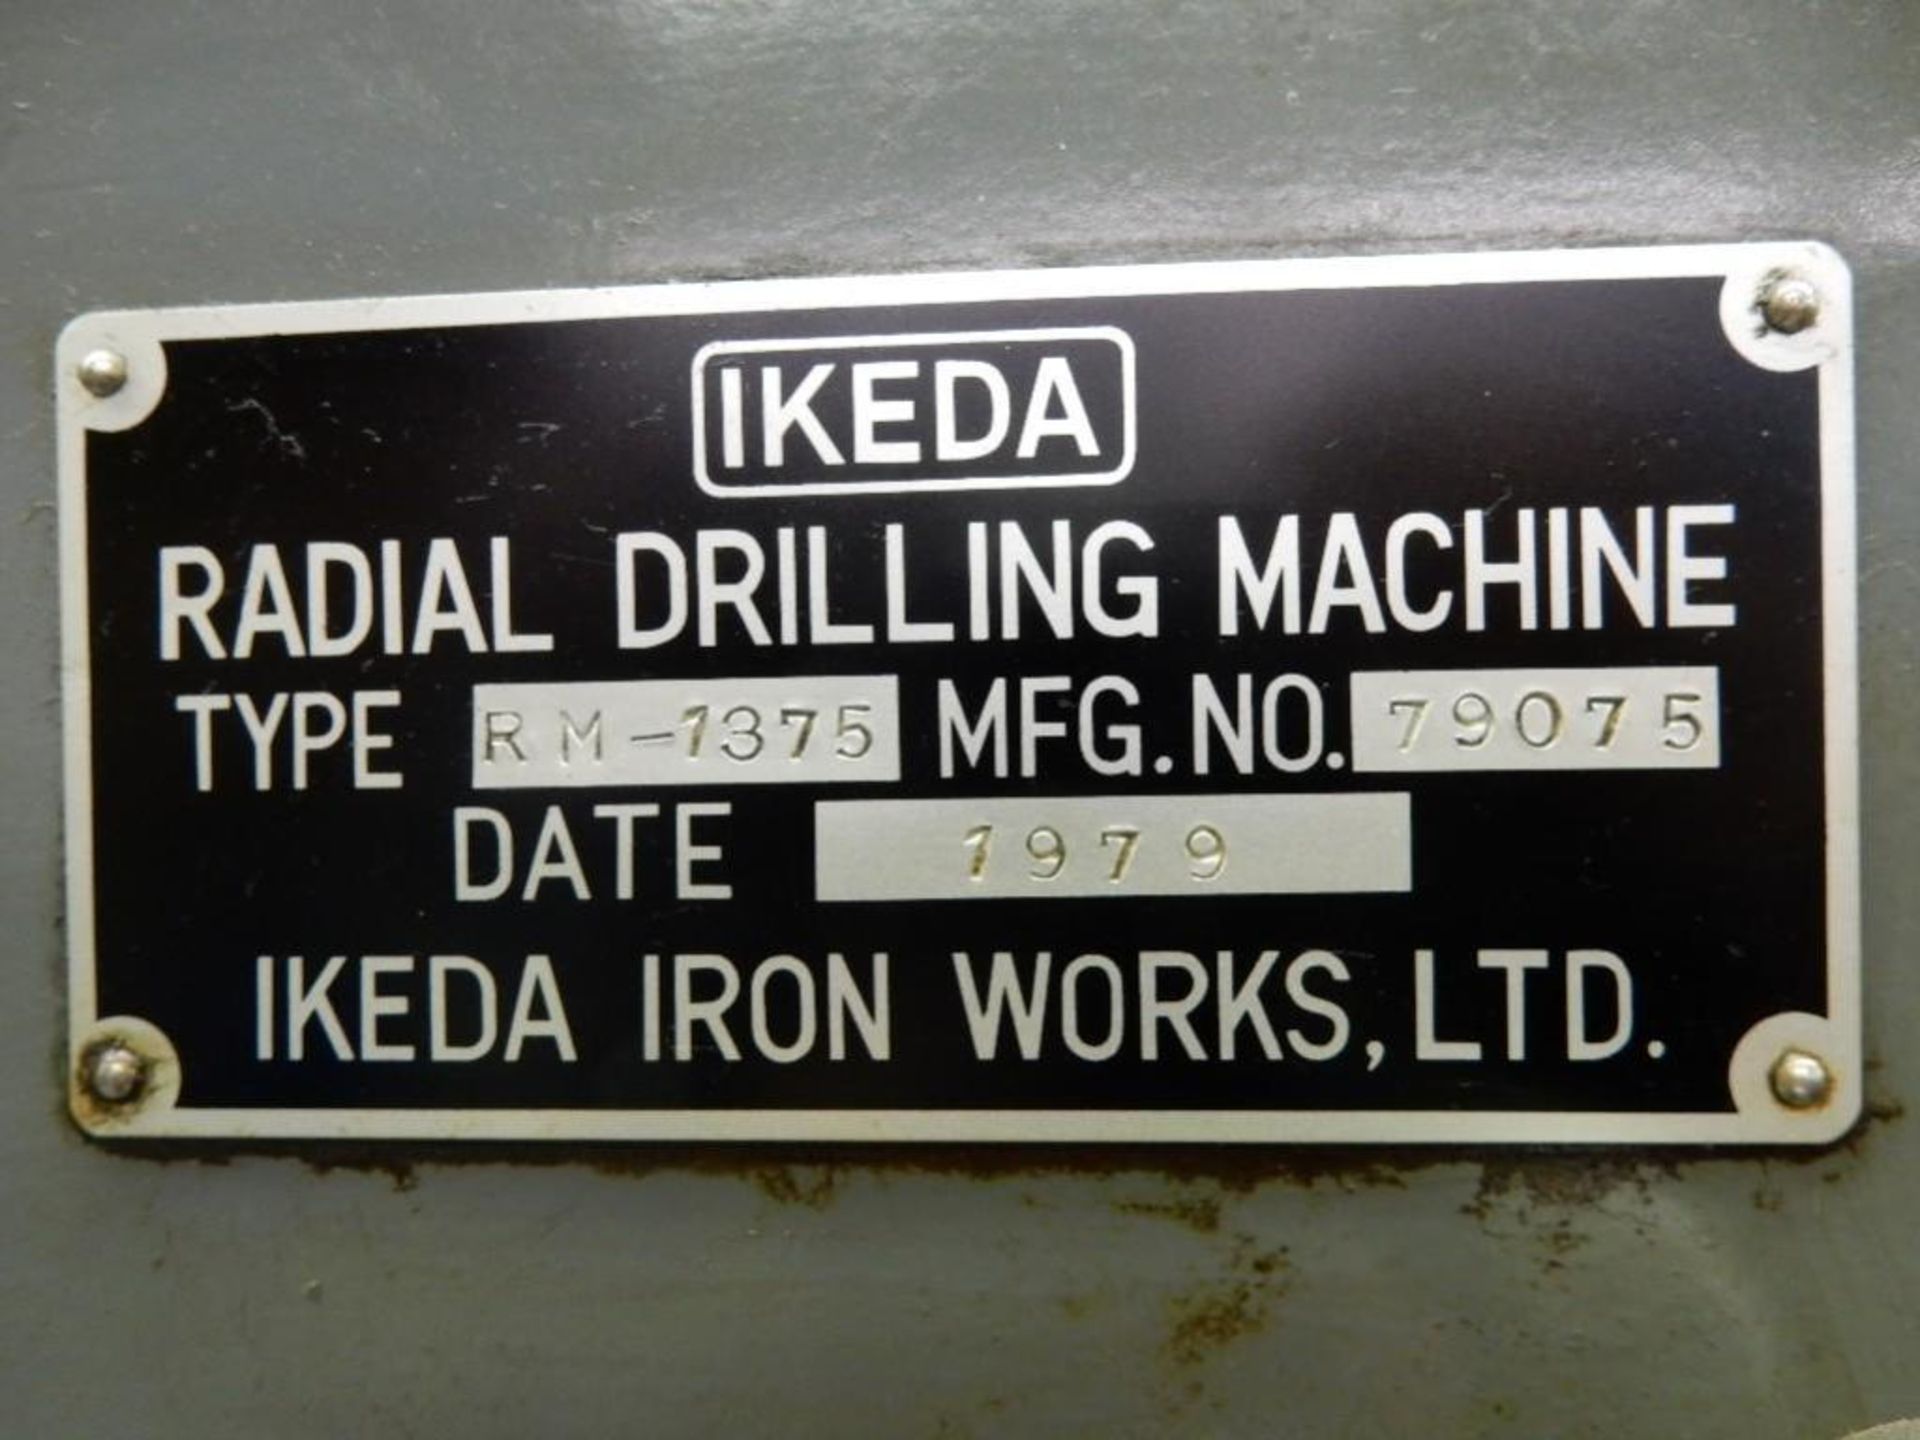 Ikeda Model RM-1375 Radial Arm Drill, 13" Column, 5' Arm, 30-1500 RPM Spindle Speeds, 26.5" - Image 14 of 27